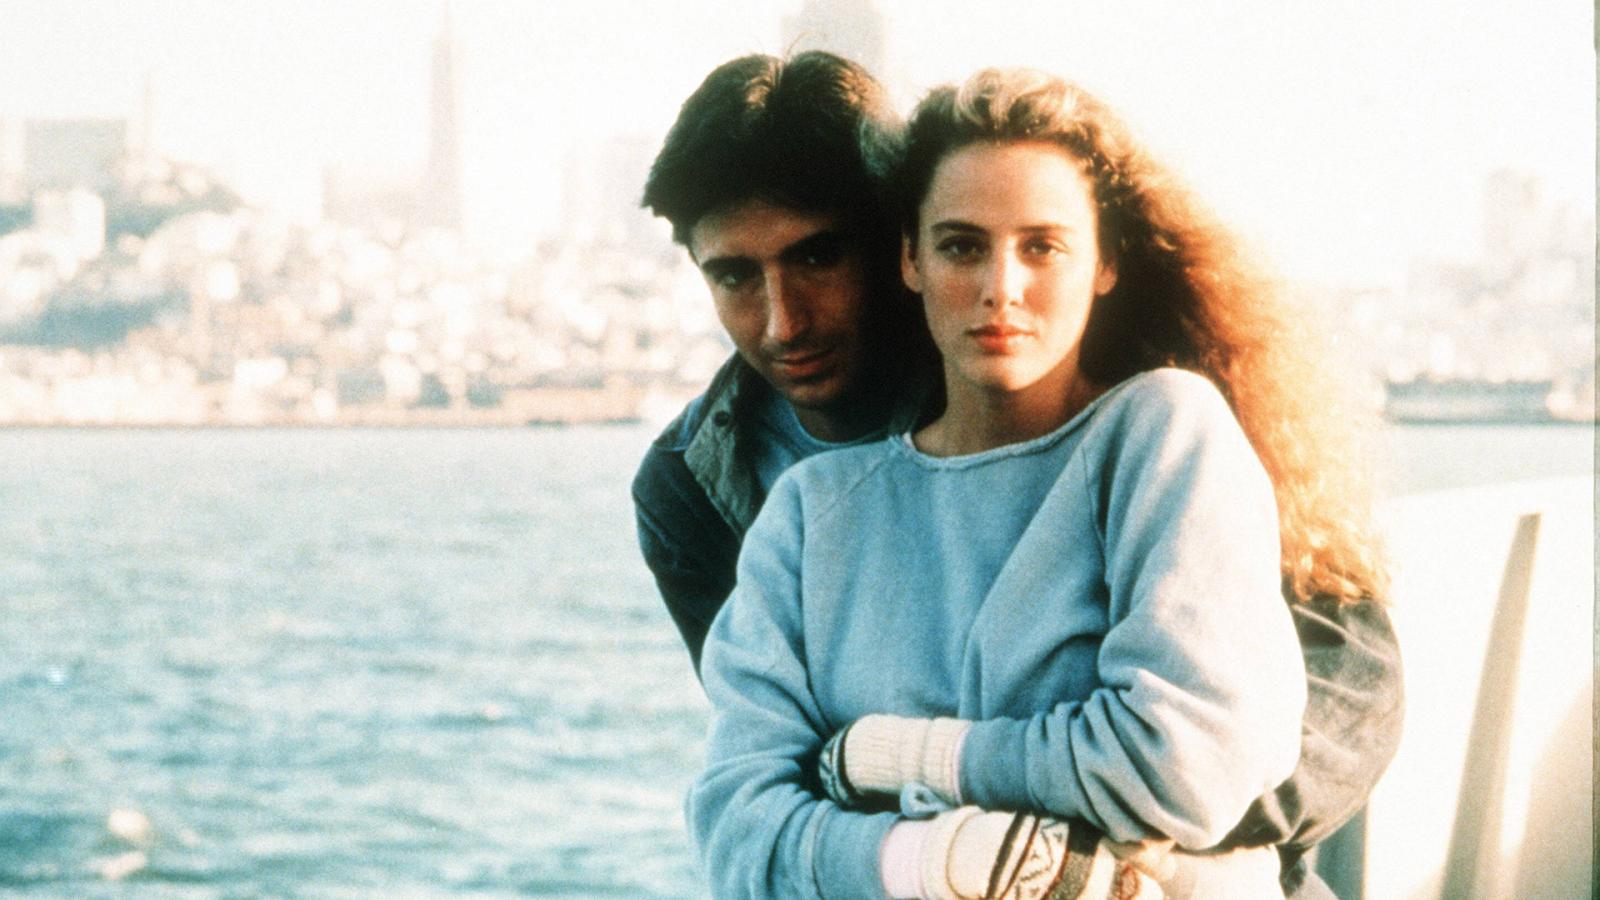 12 Forgotten Romantic Comedies of the '80s That Are Pure Gold - image 12